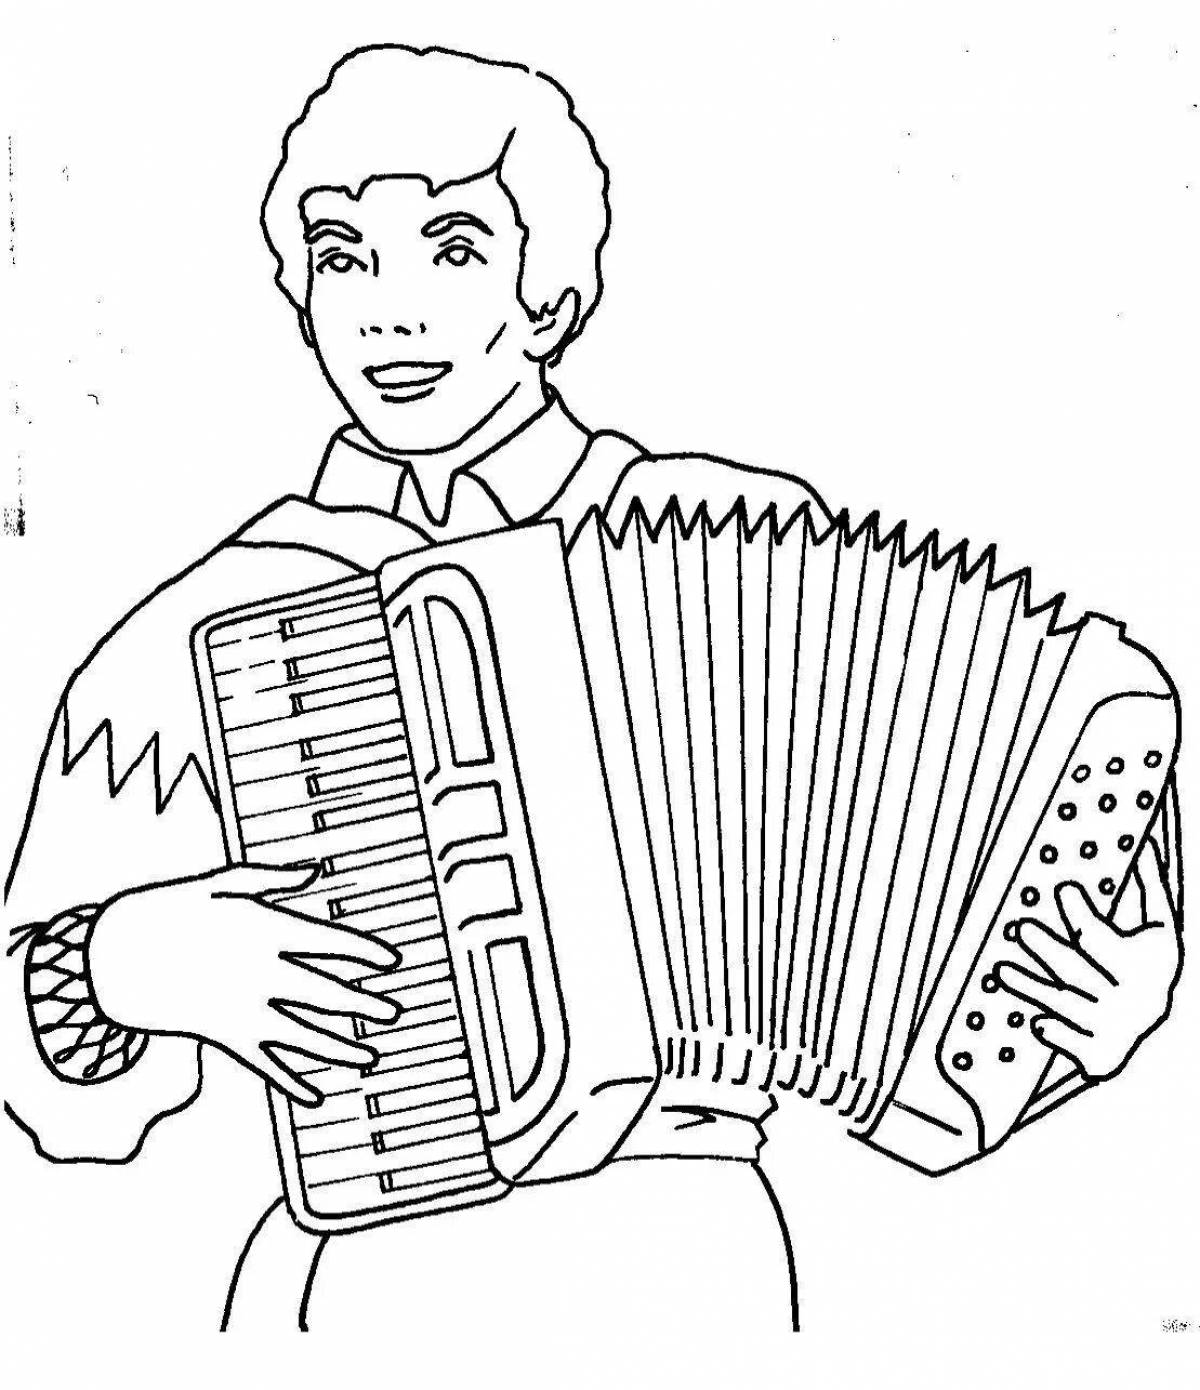 Fascinating accordion coloring book for kids